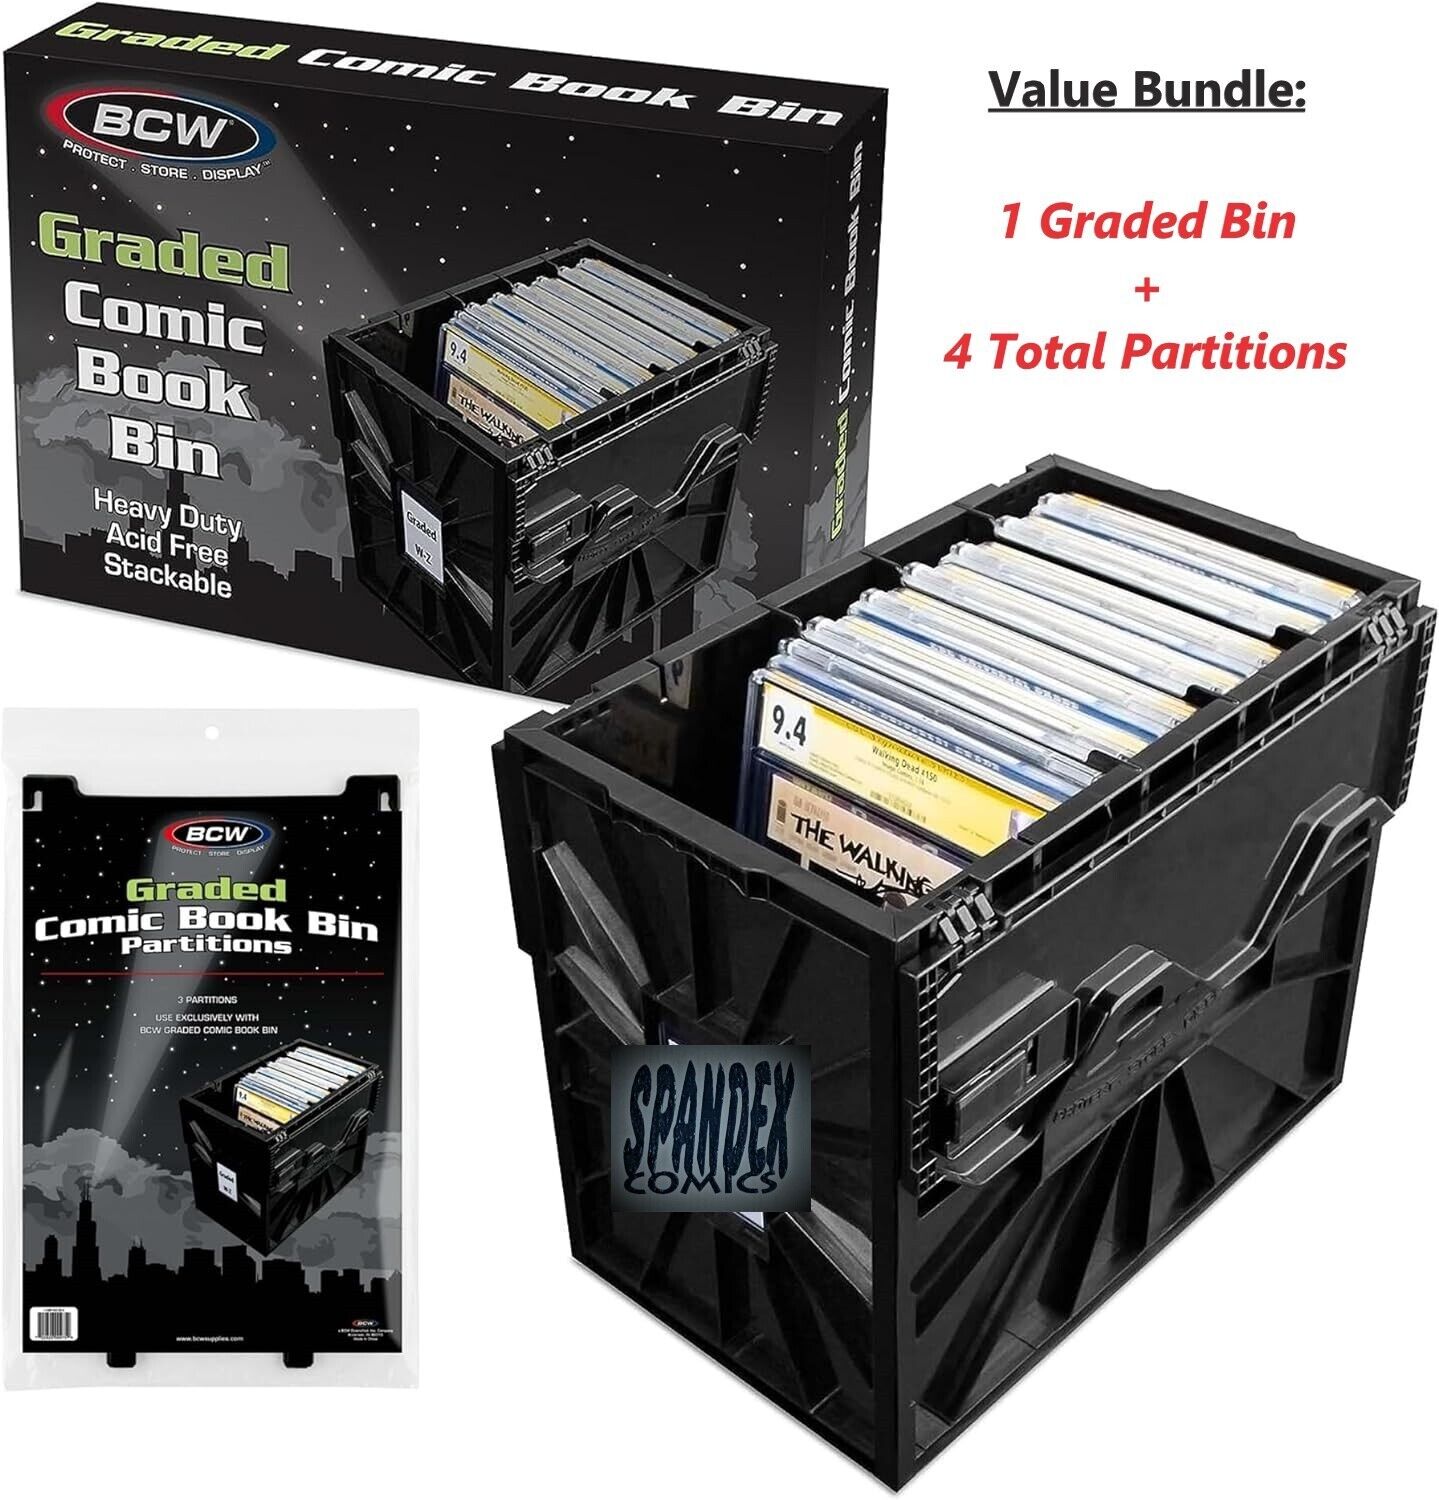 BCW Black Graded Comic Book Bin & Extra Partitions Bundle - 4 Partitions Total